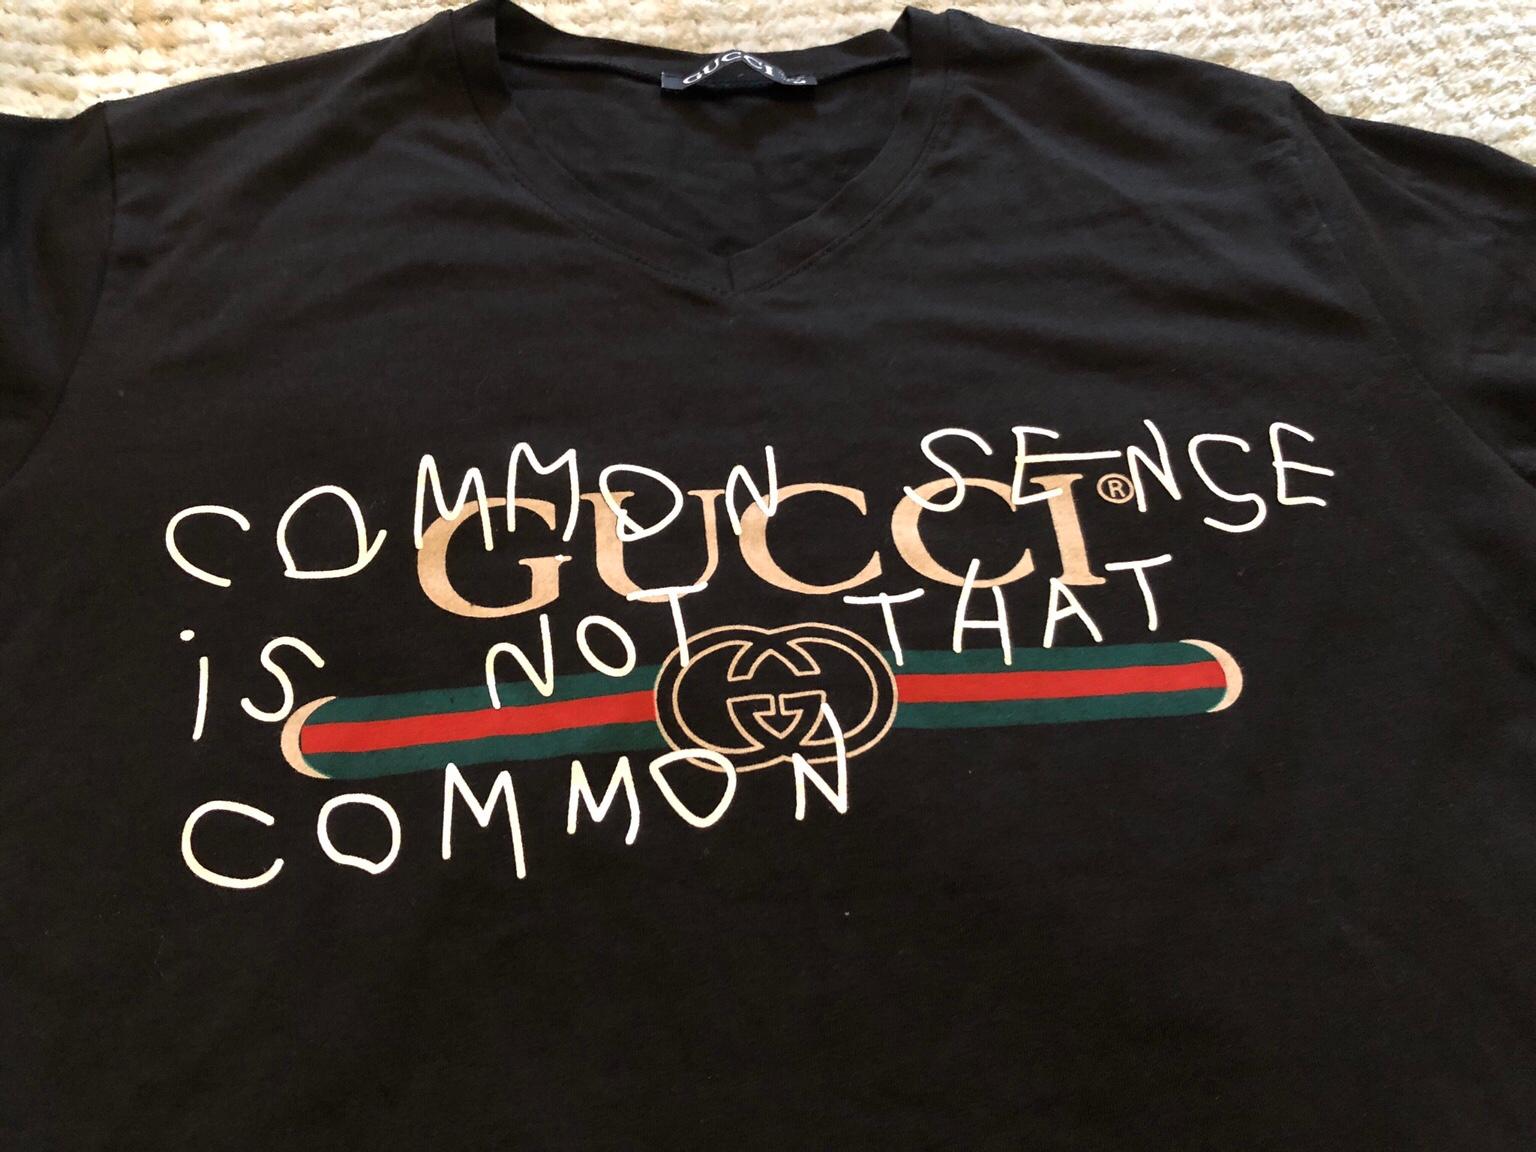 common sense is not that common gucci t shirt